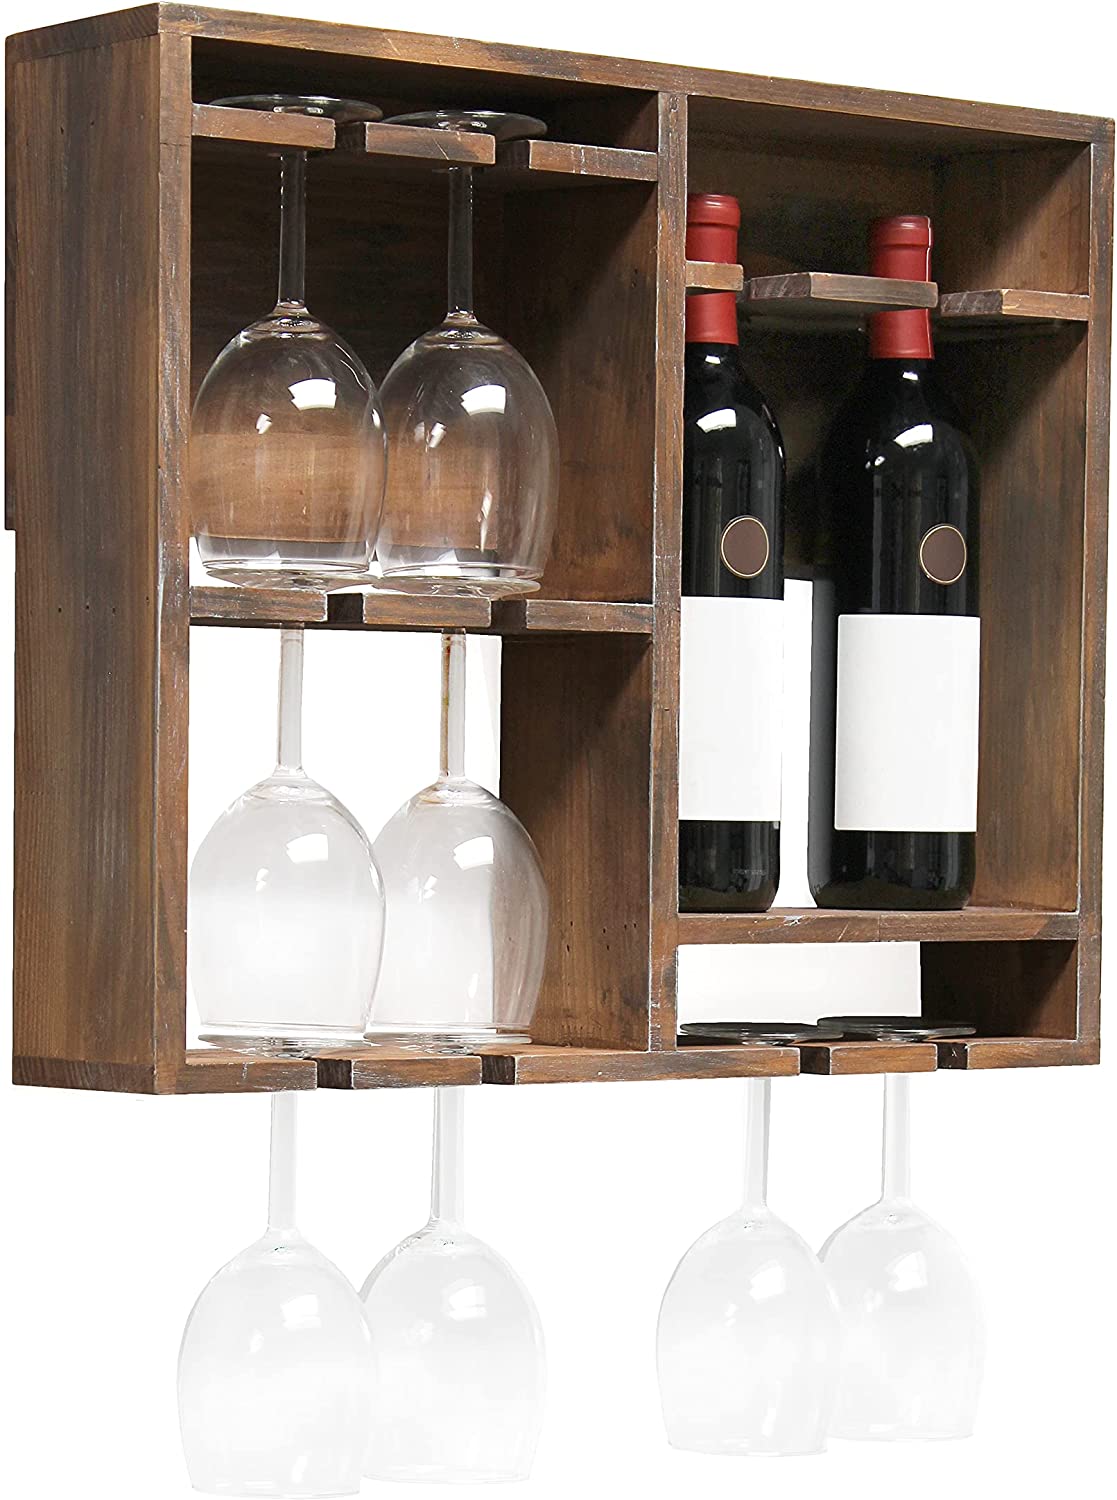 Elegant Designs HG1020-WWH Bartow Wood Shelf with Glass Holder Wall Mounted Wine Rack, White Wash